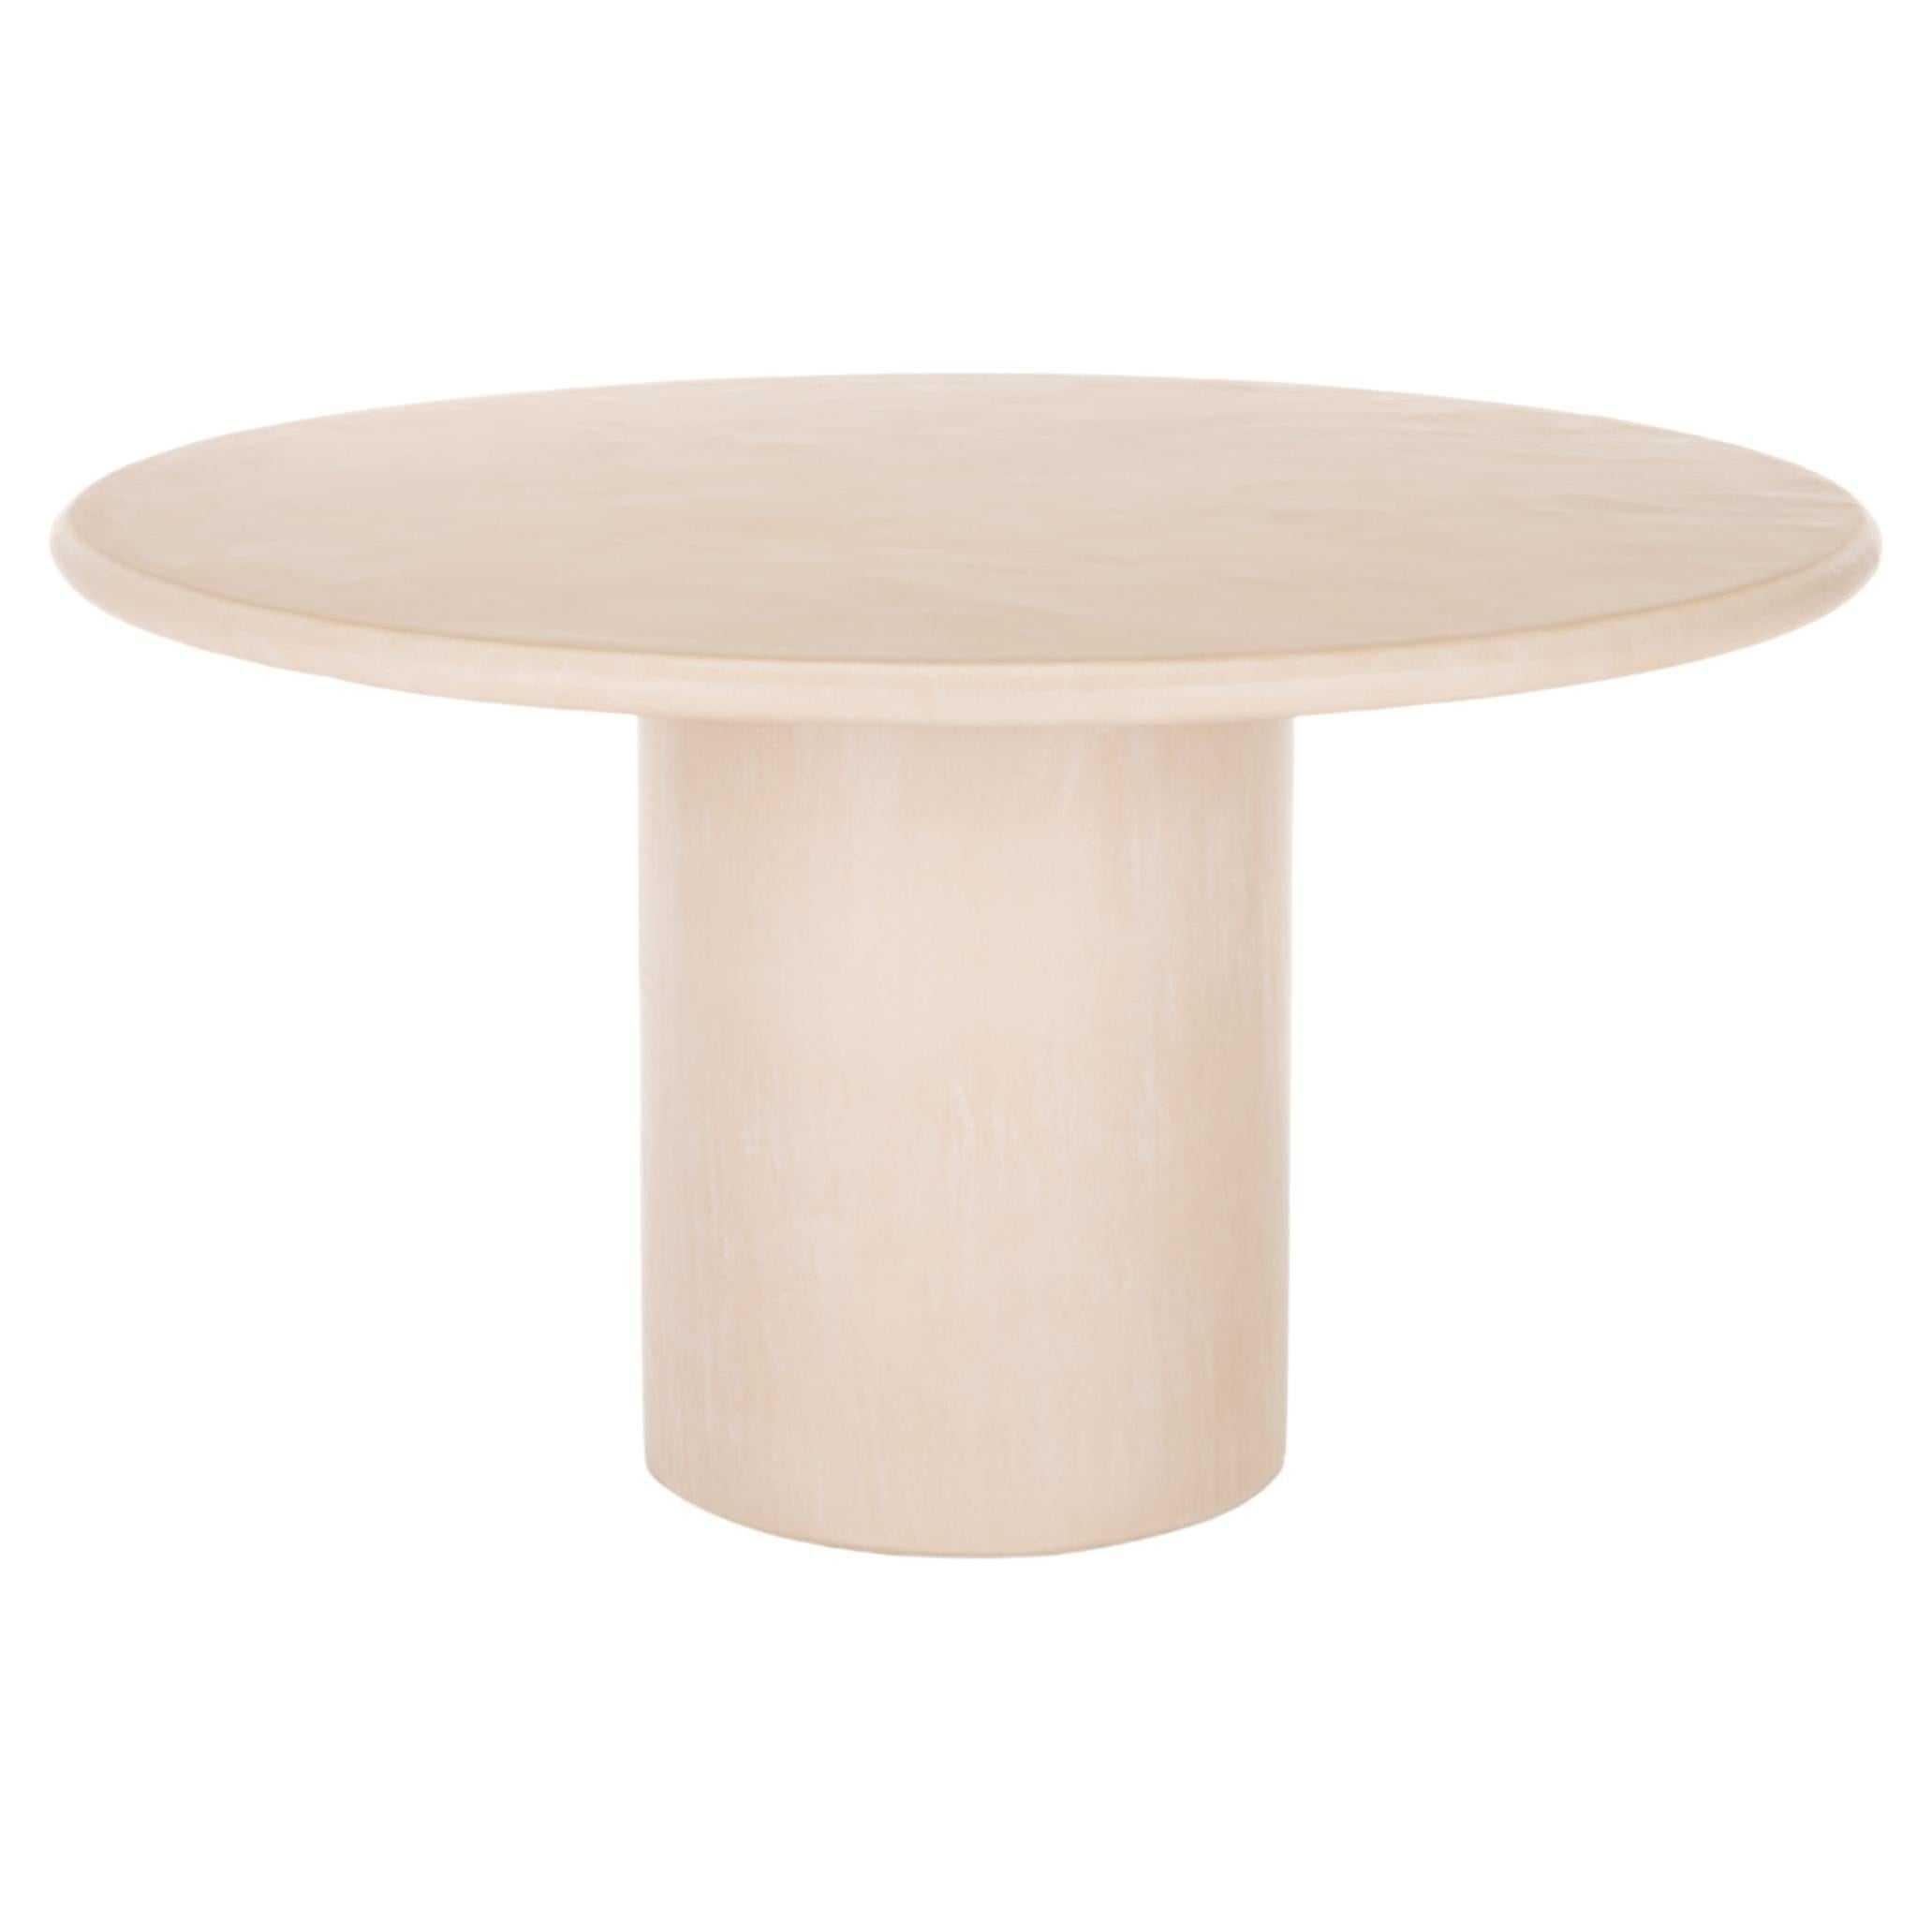 Round Natural Plaster Dining Table "Column" 180 by Isabelle Beaumont For Sale